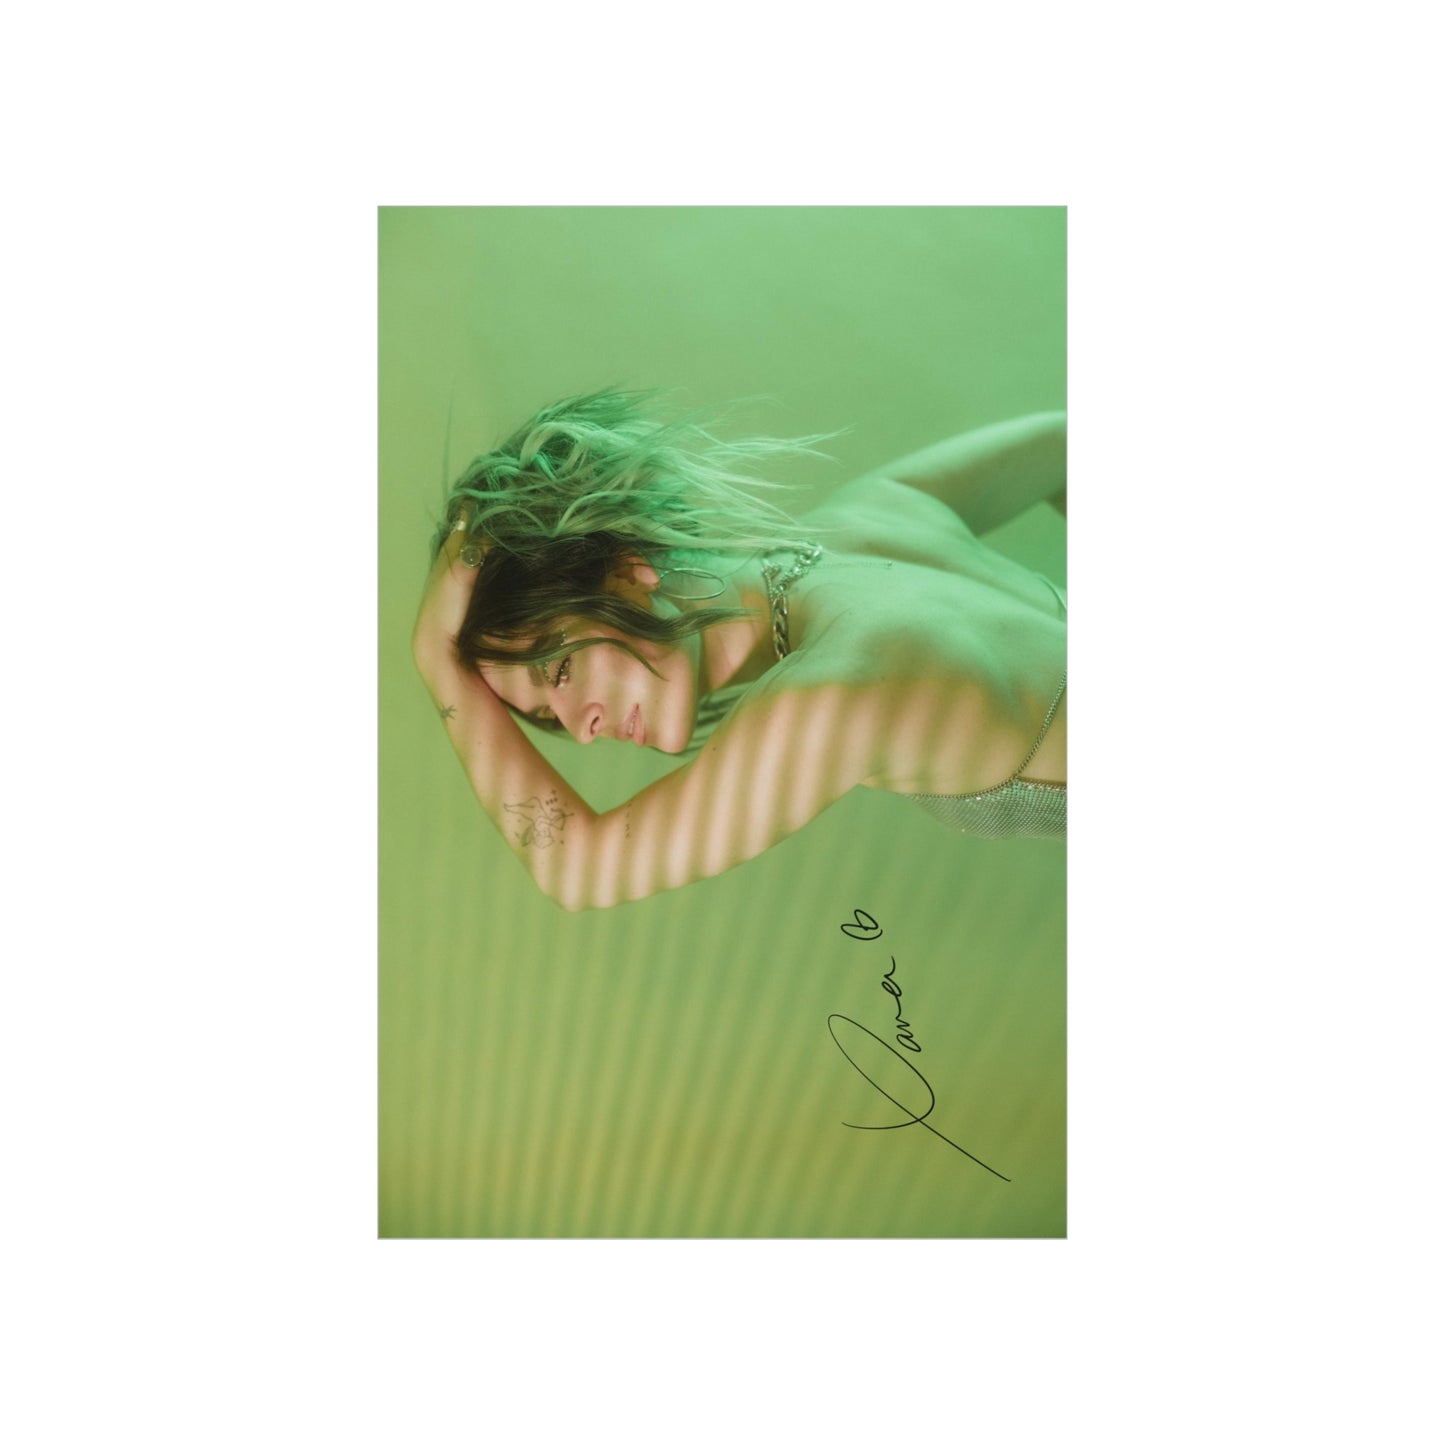 You See Green & Don't Think About Me - Signed Poster